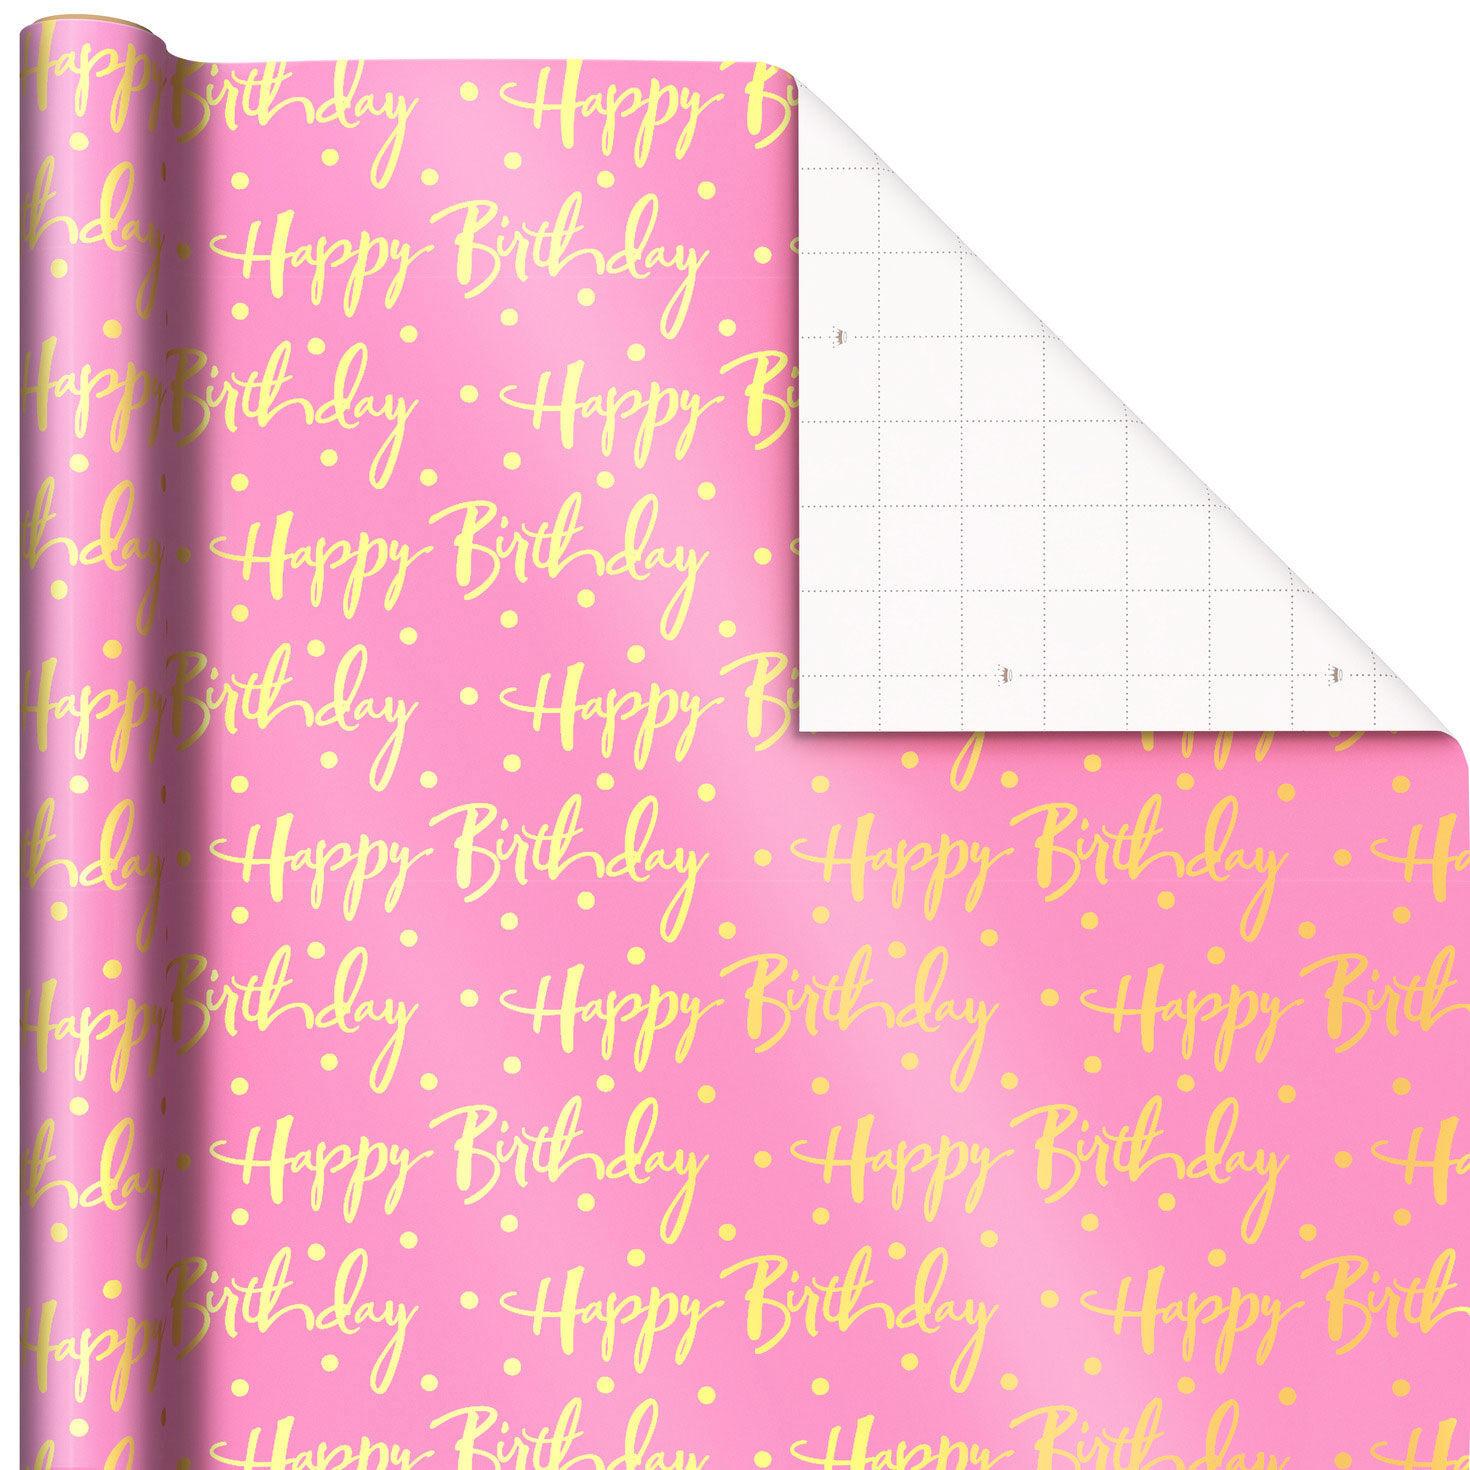 Pink Foil Happy Birthday Wrapping Paper Roll, 15 sq. ft.